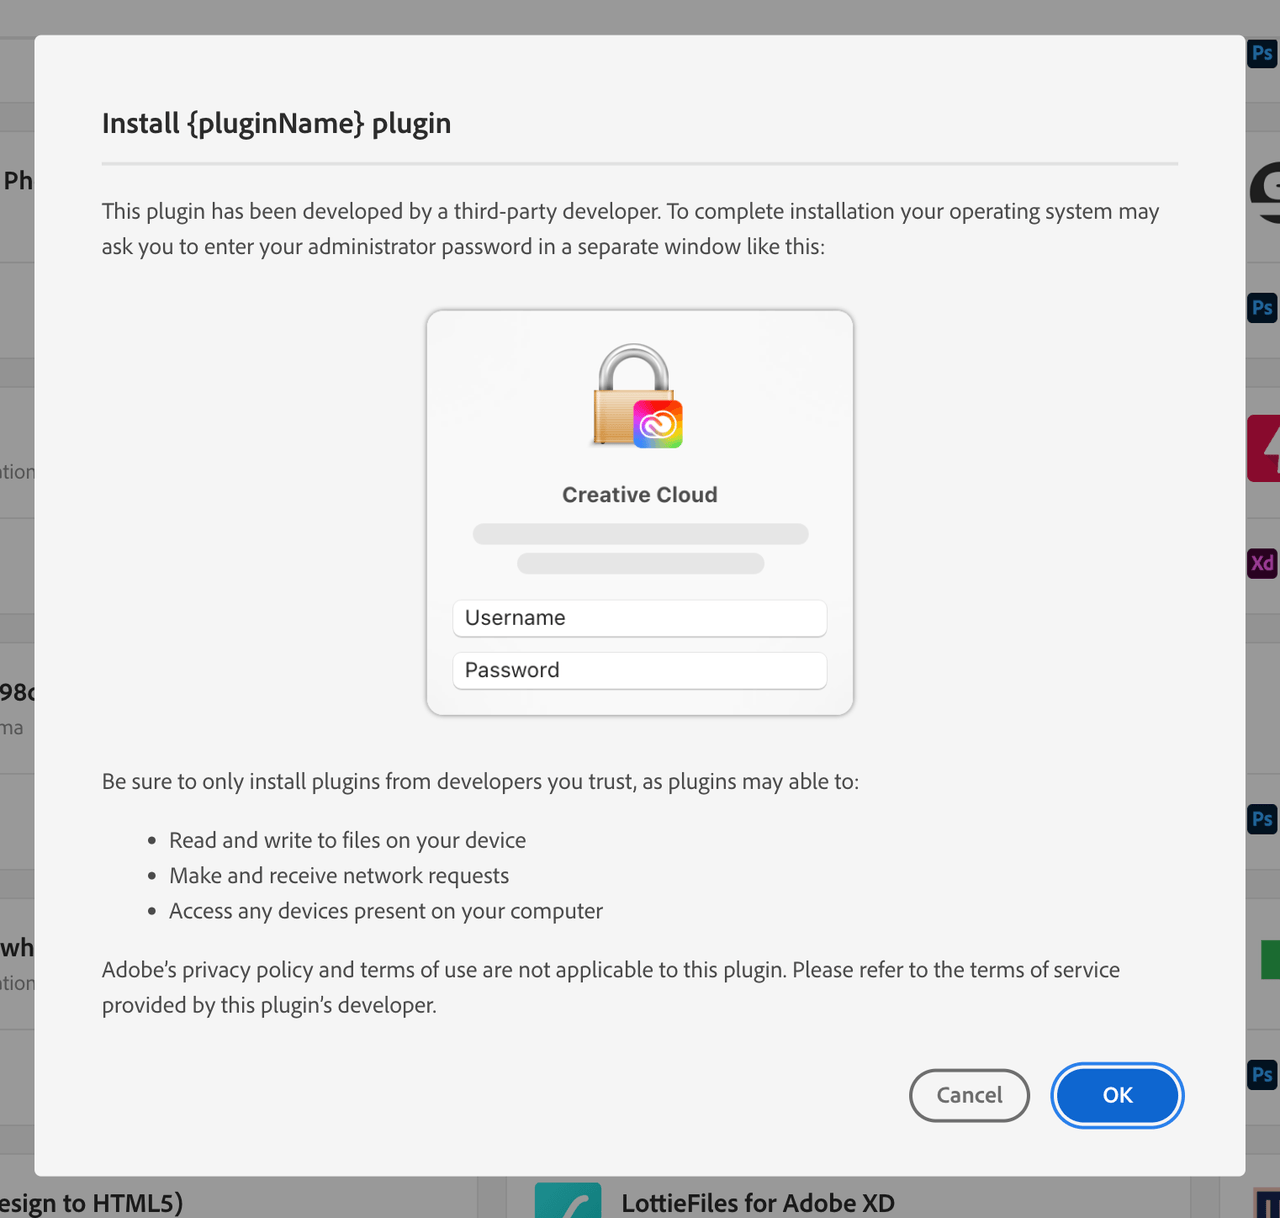 Pluign install dialog in macOS